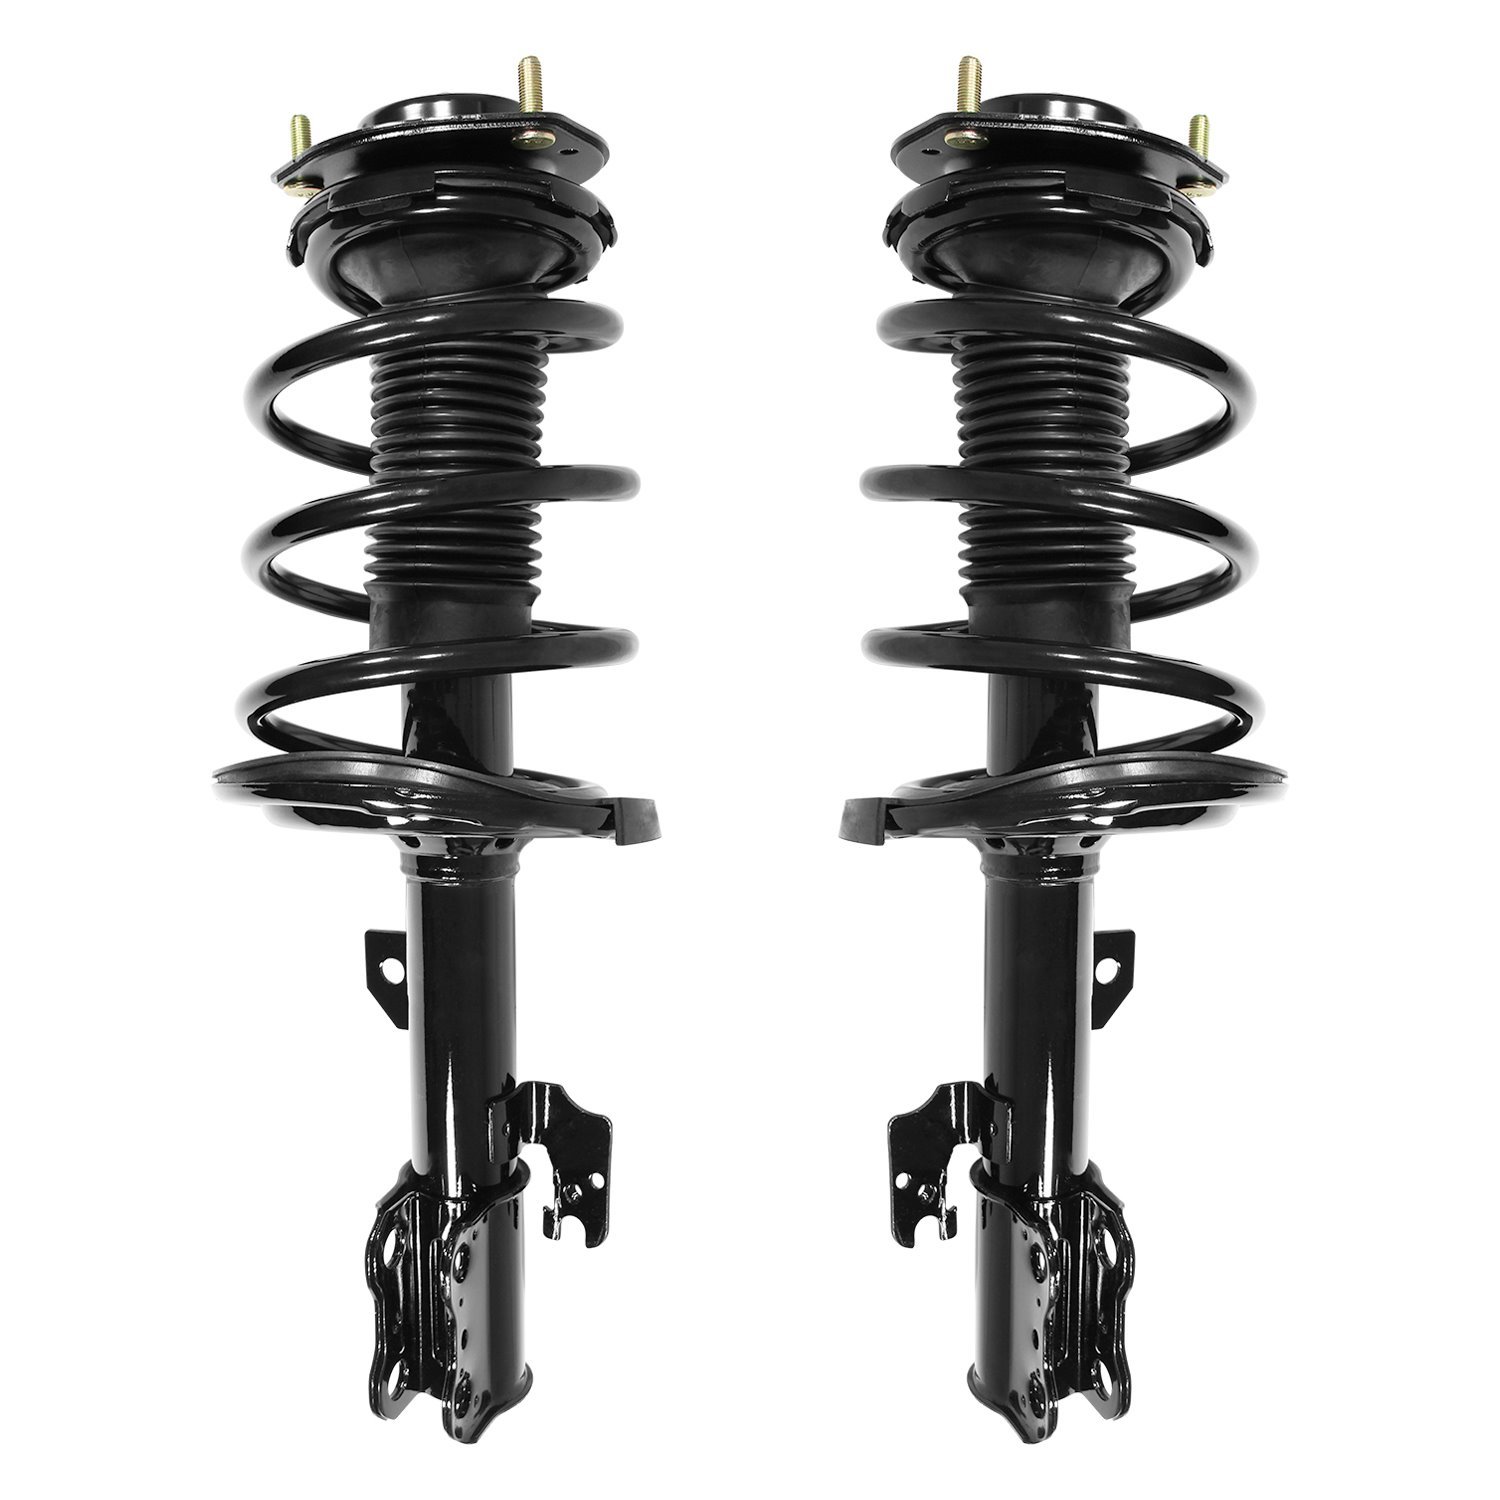 2-11741-11742-001 Suspension Strut & Coil Spring Assembly Set Fits Select Lexus ES350, Toyota Avalon, Toyota Camry